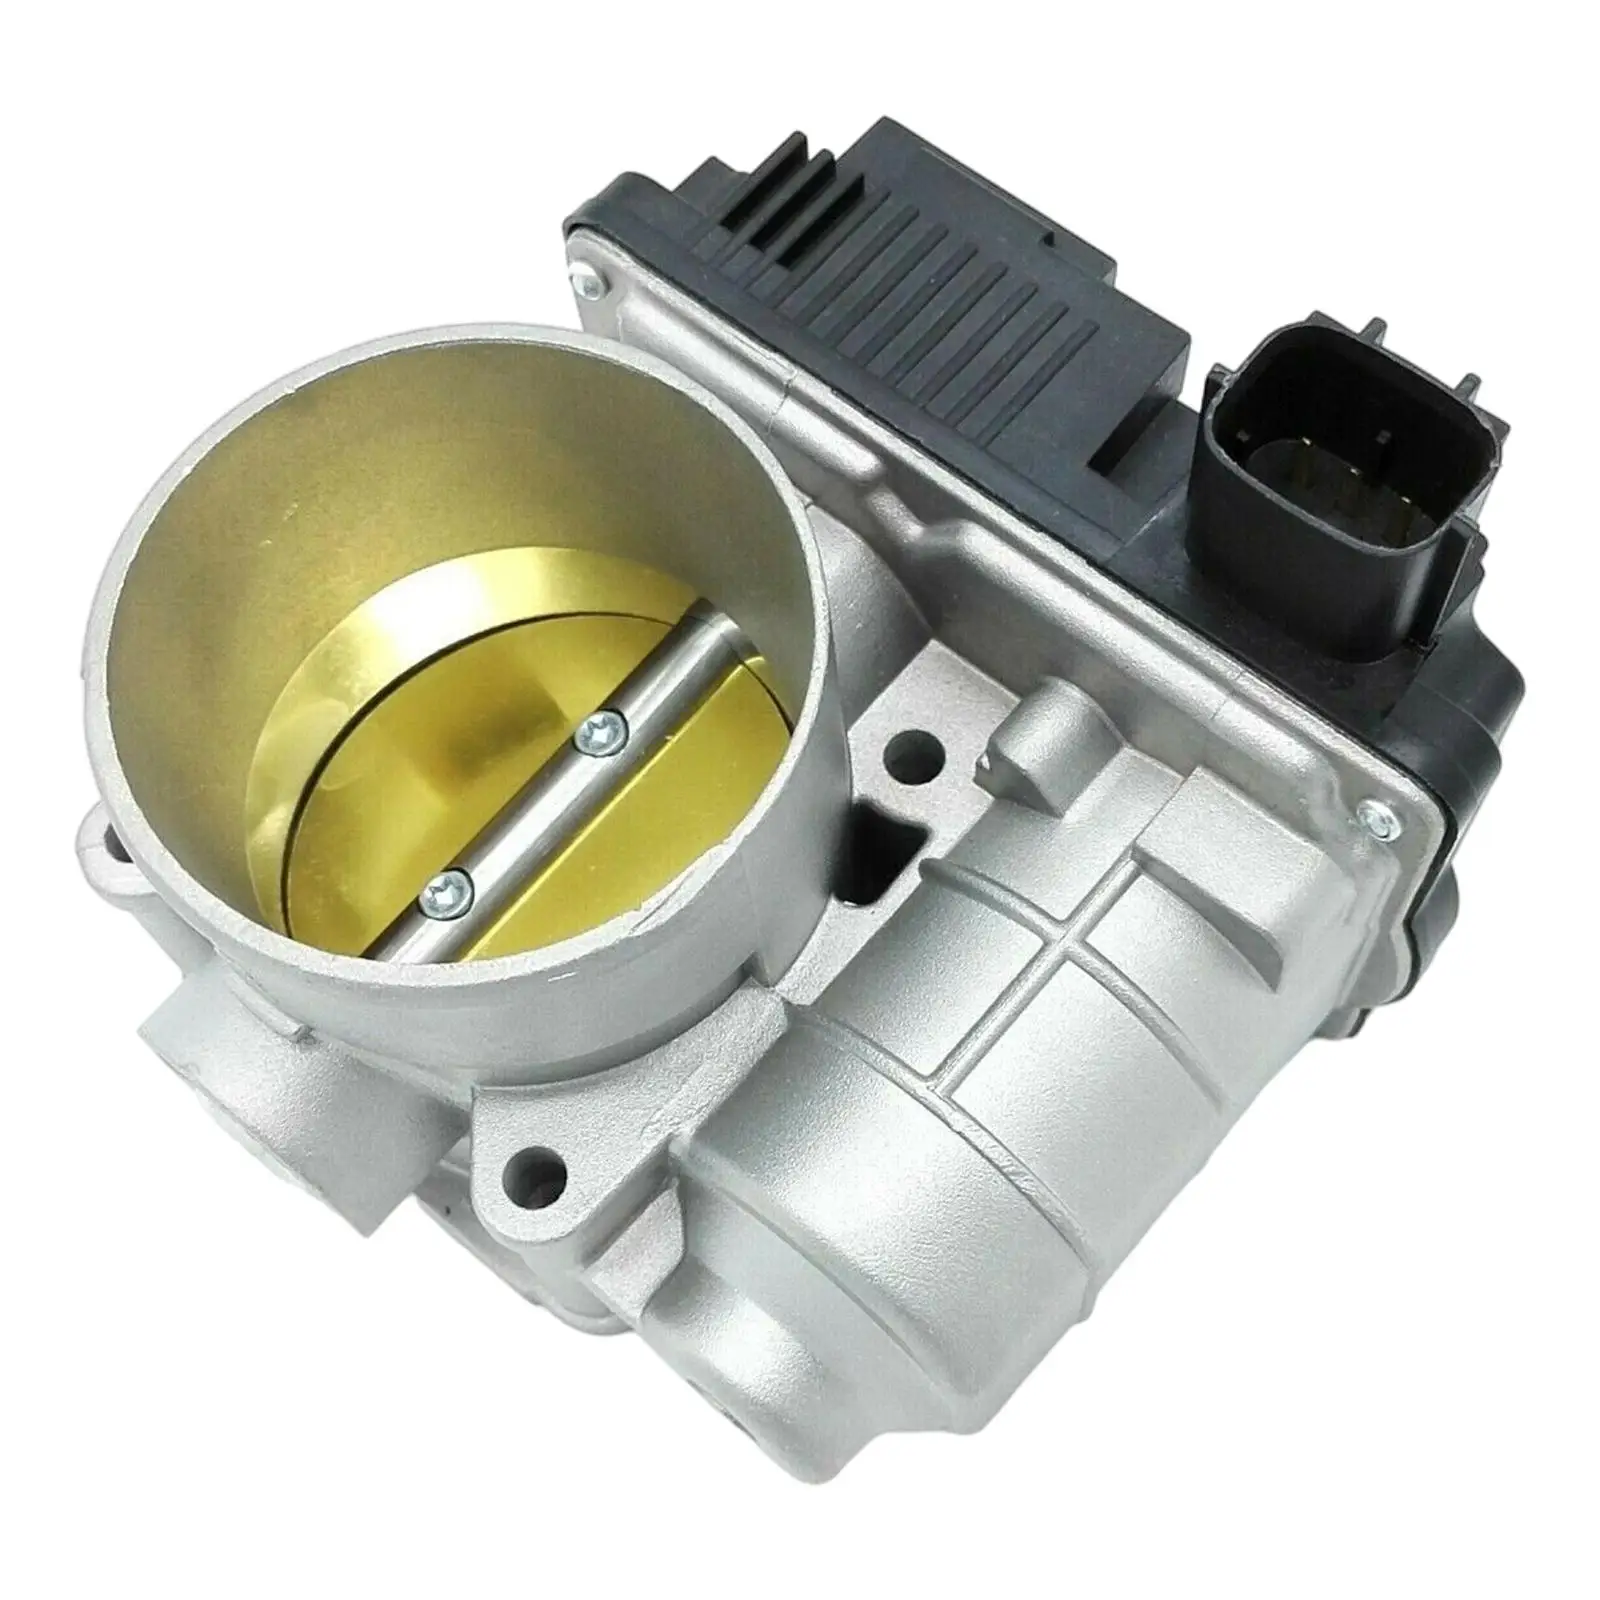 16119-AE013, Idle Air Control Sensor Electronic Aembly Fuel Injection Sera576-01, Throttle Body Fit for Nian Car Parts